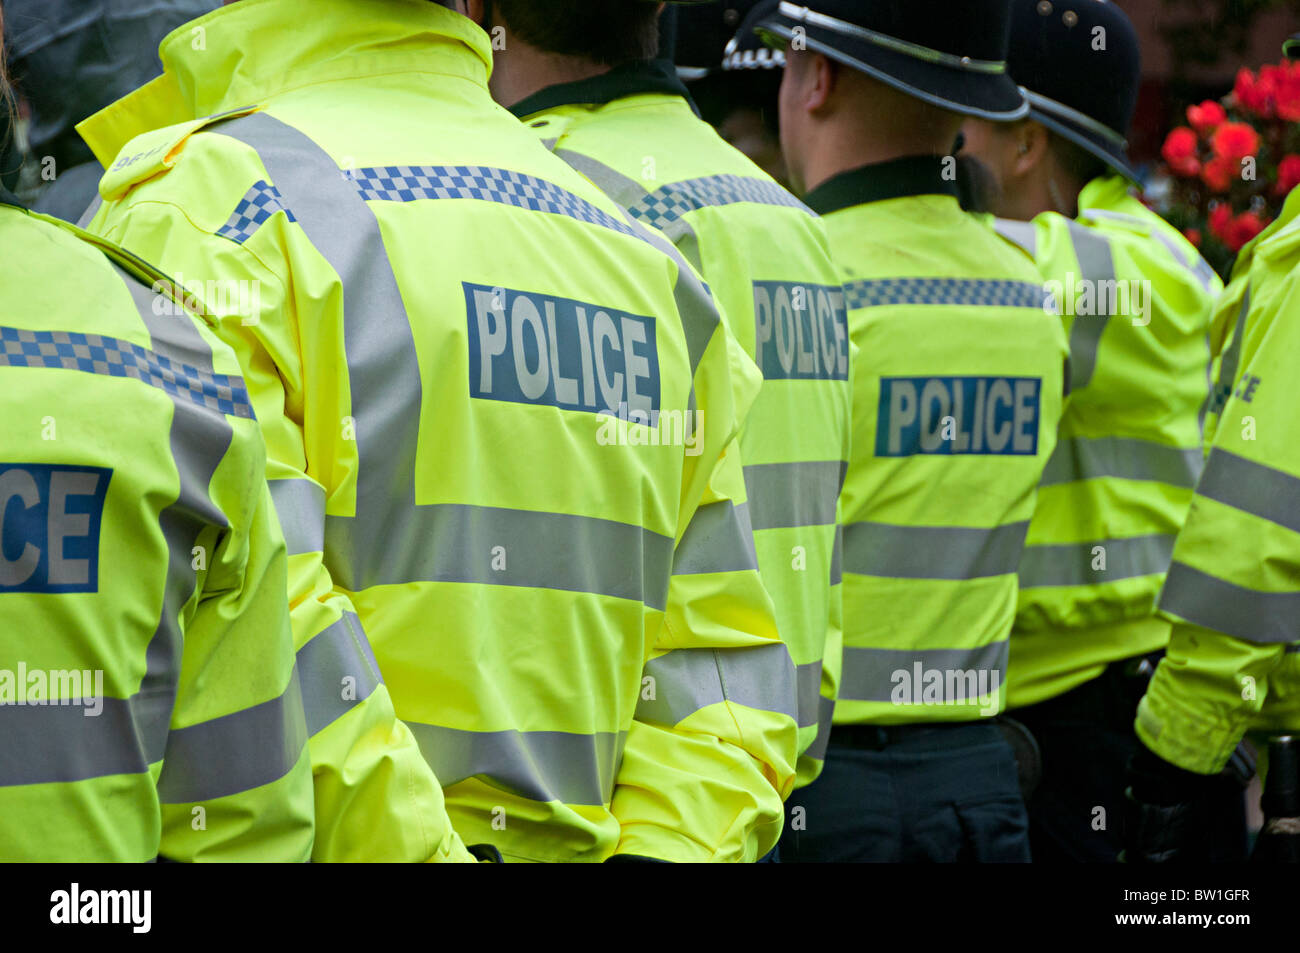 rows of police jackets at the Workers march against Coalition cuts birmingham Stock Photo